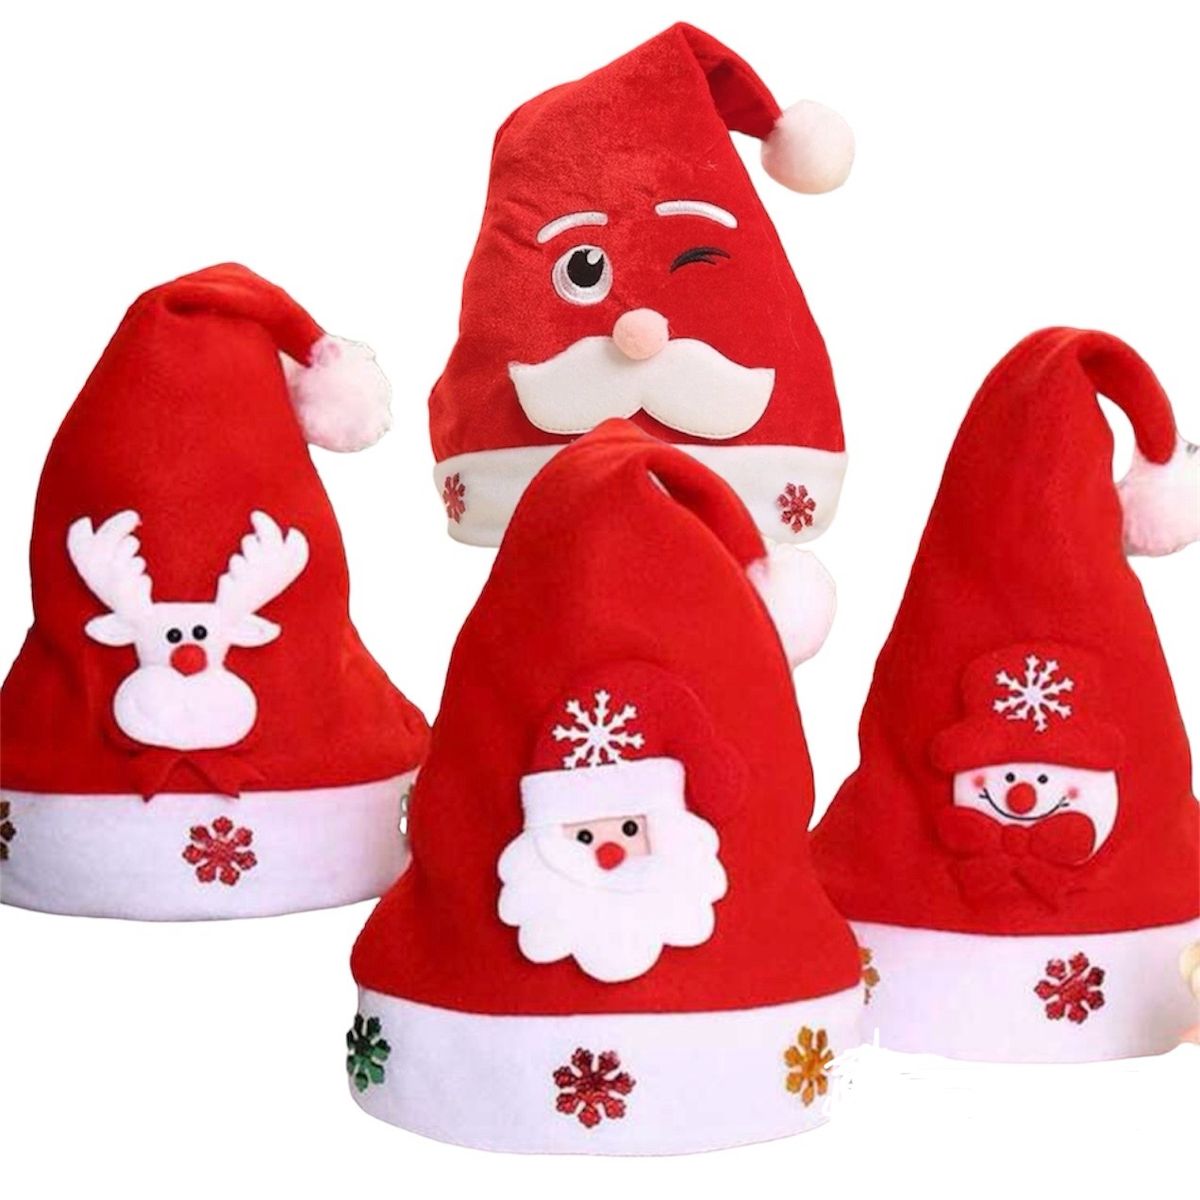 4pcs Christmas Hats With Decorations - Santa Hats For Adults & Kids